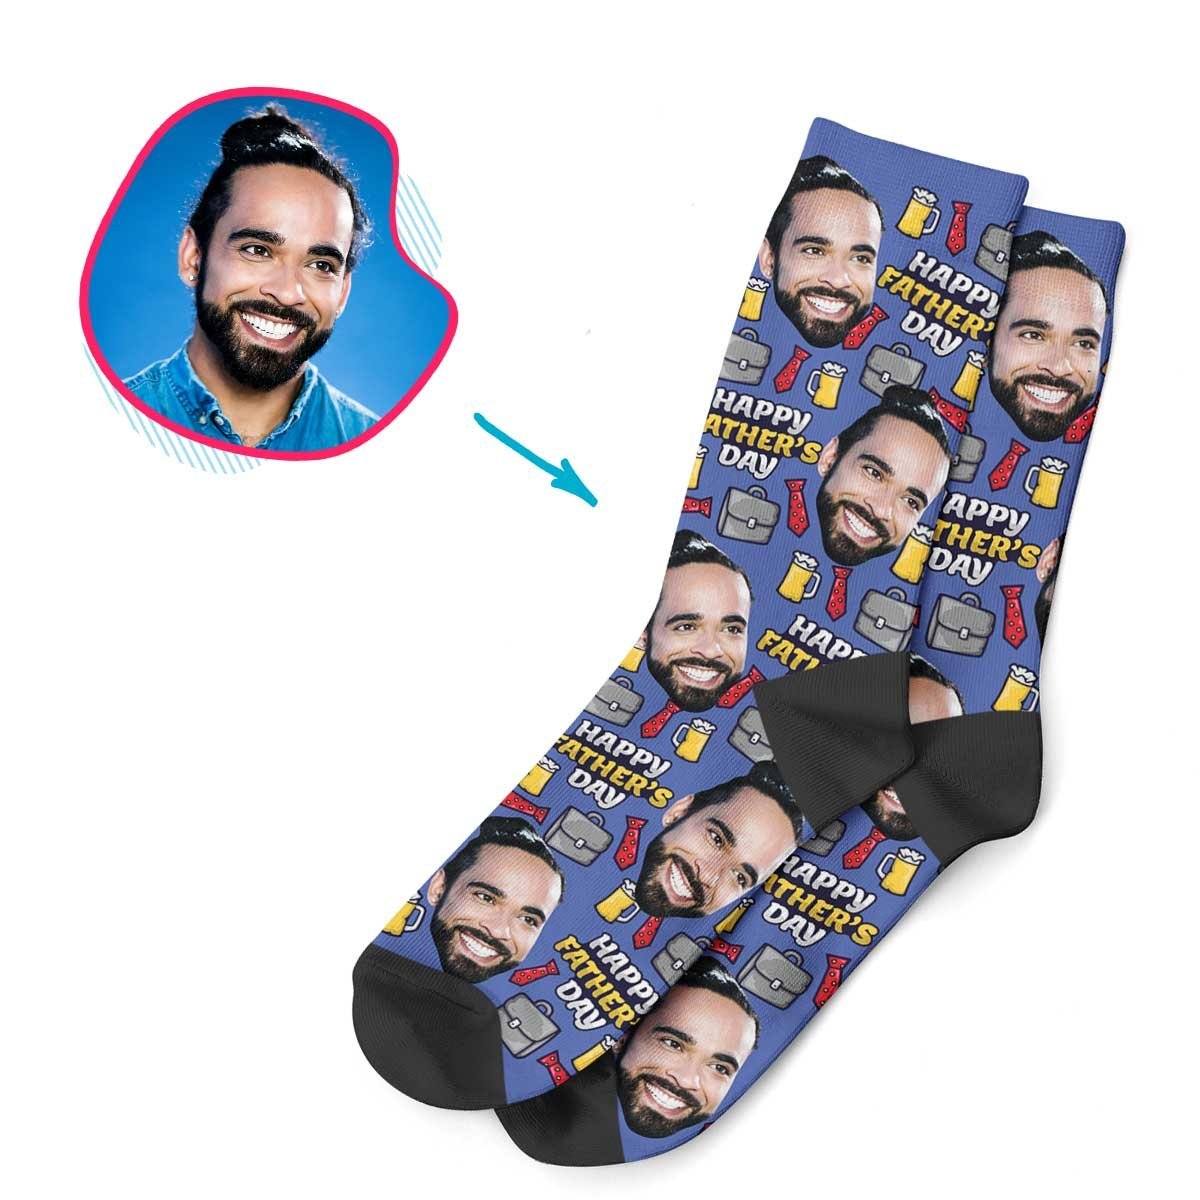 Darkblue Fathers Day personalized socks with photo of face printed on them